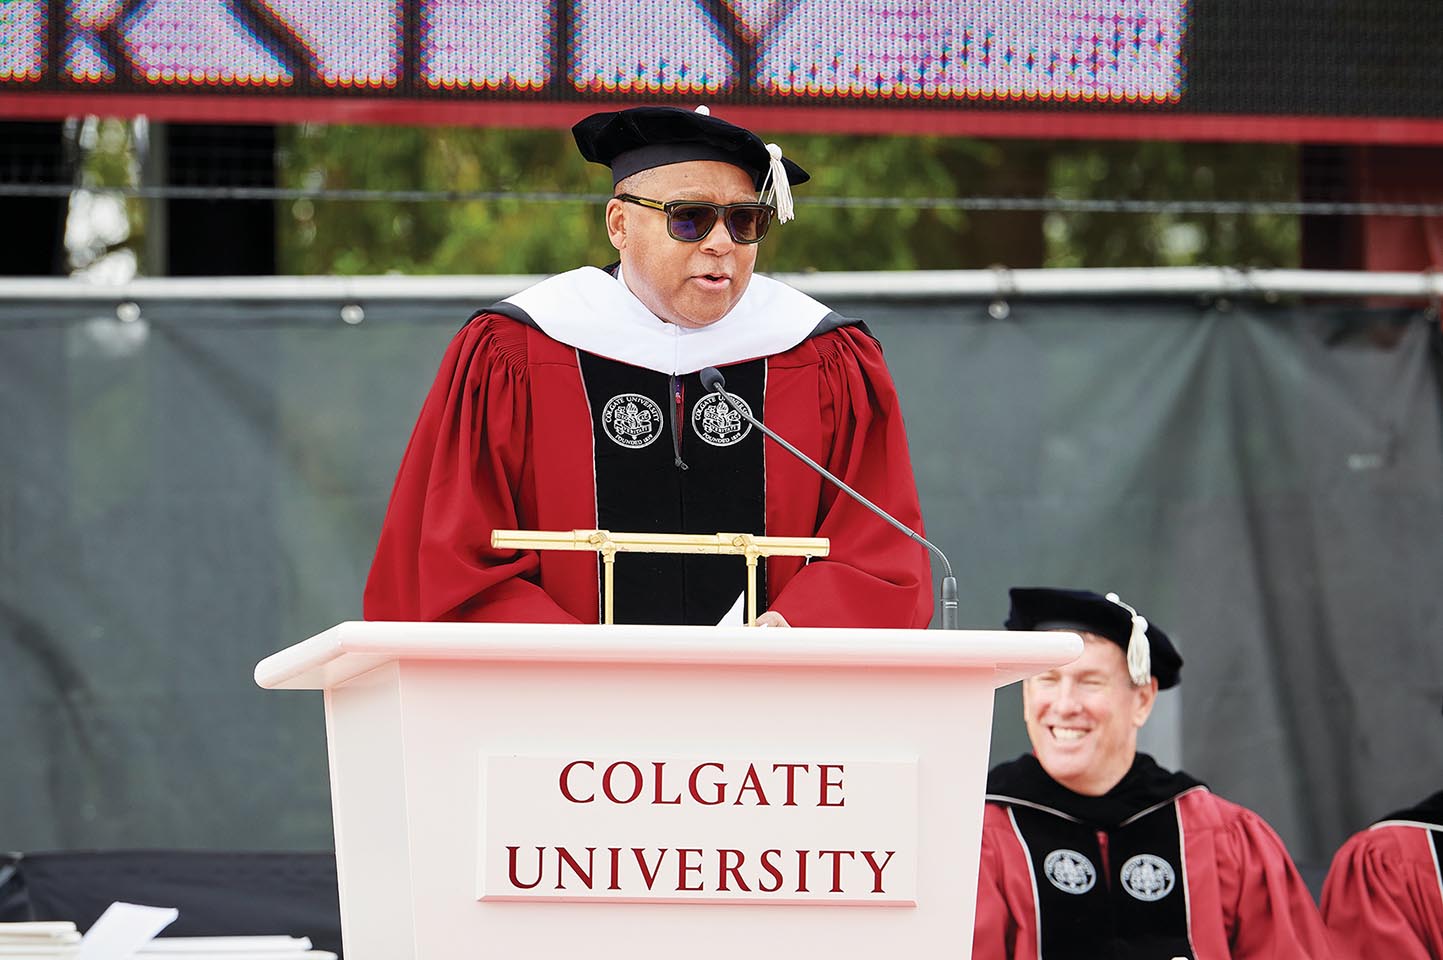 Wynton Marsalis, dressed in commencement robe and sunglasses, gives the 2023 commencement speech.